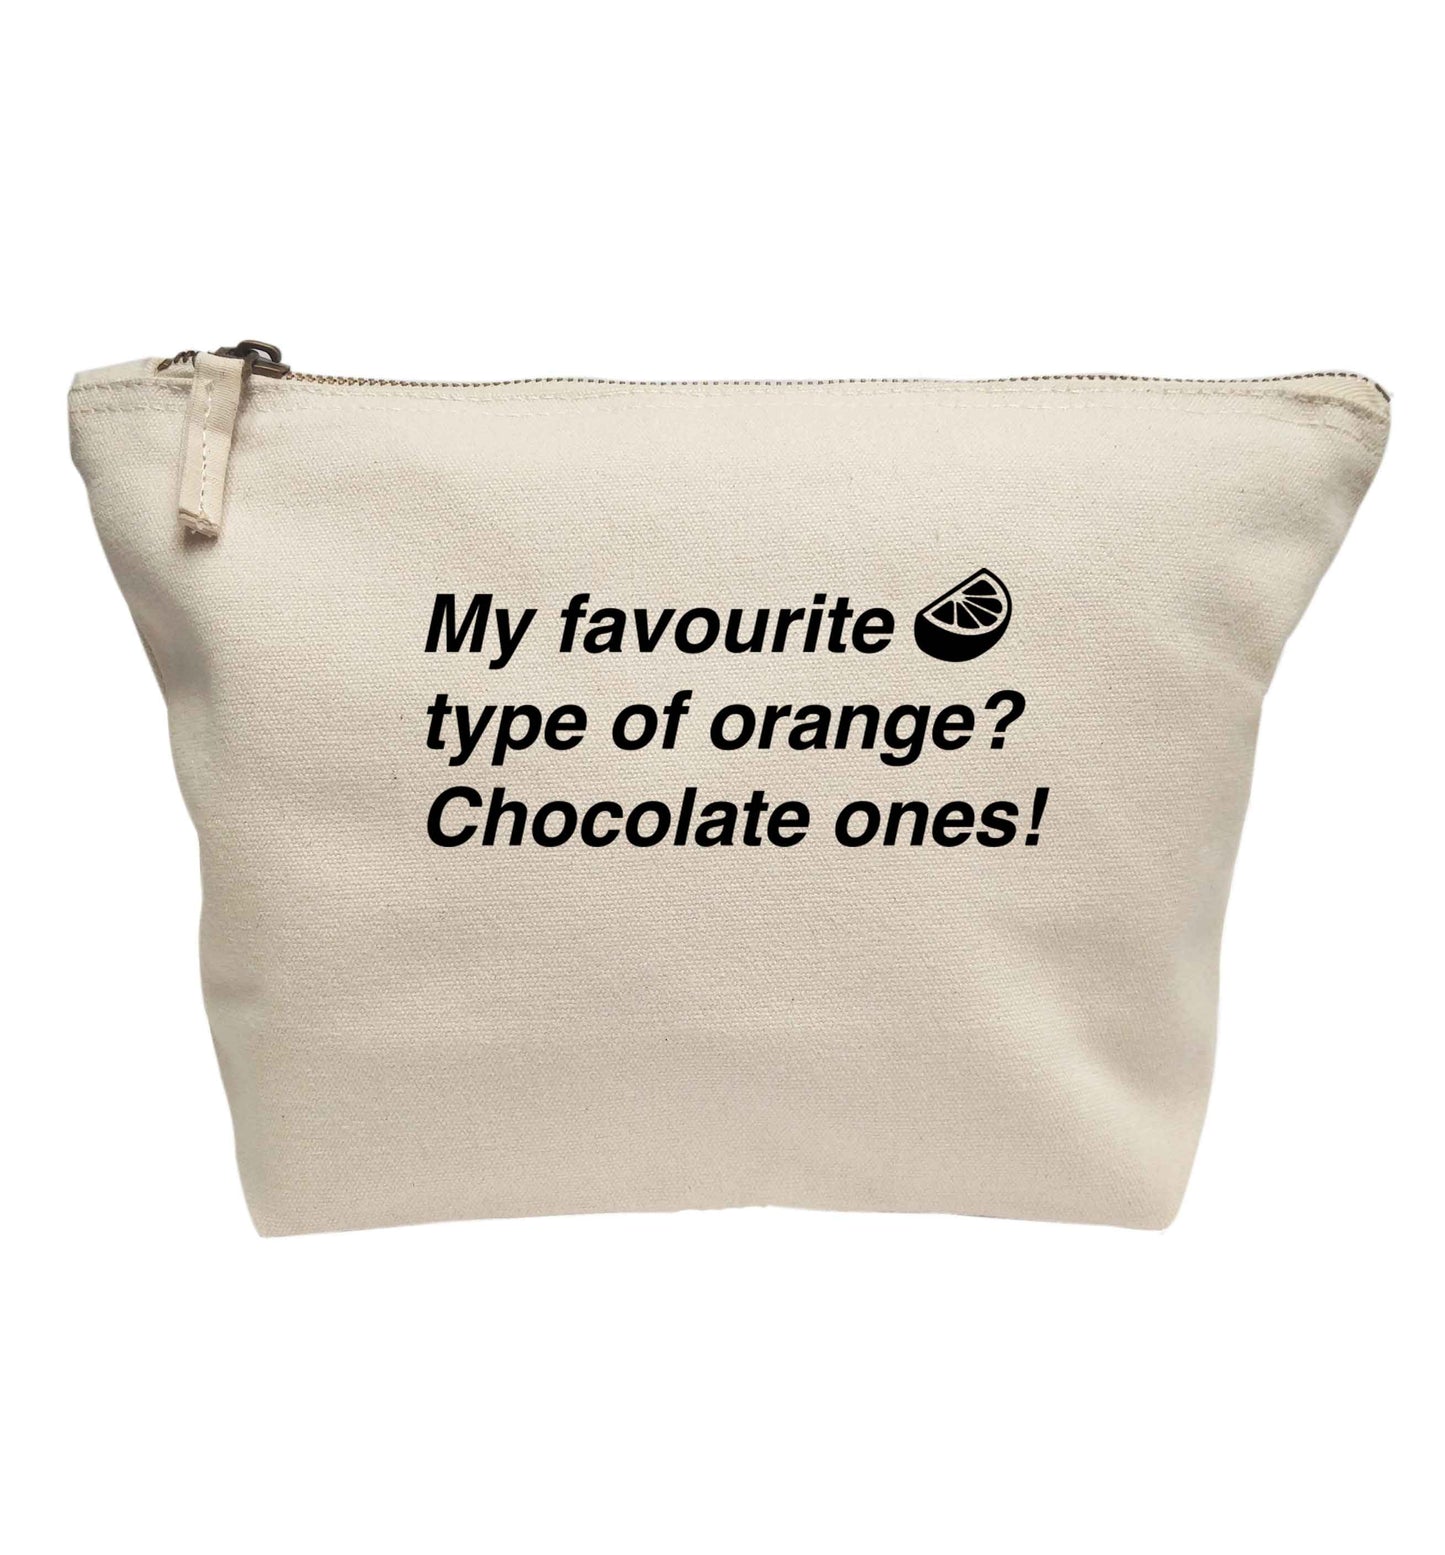 My favourite kind of oranges? Chocolate ones! | Makeup / wash bag